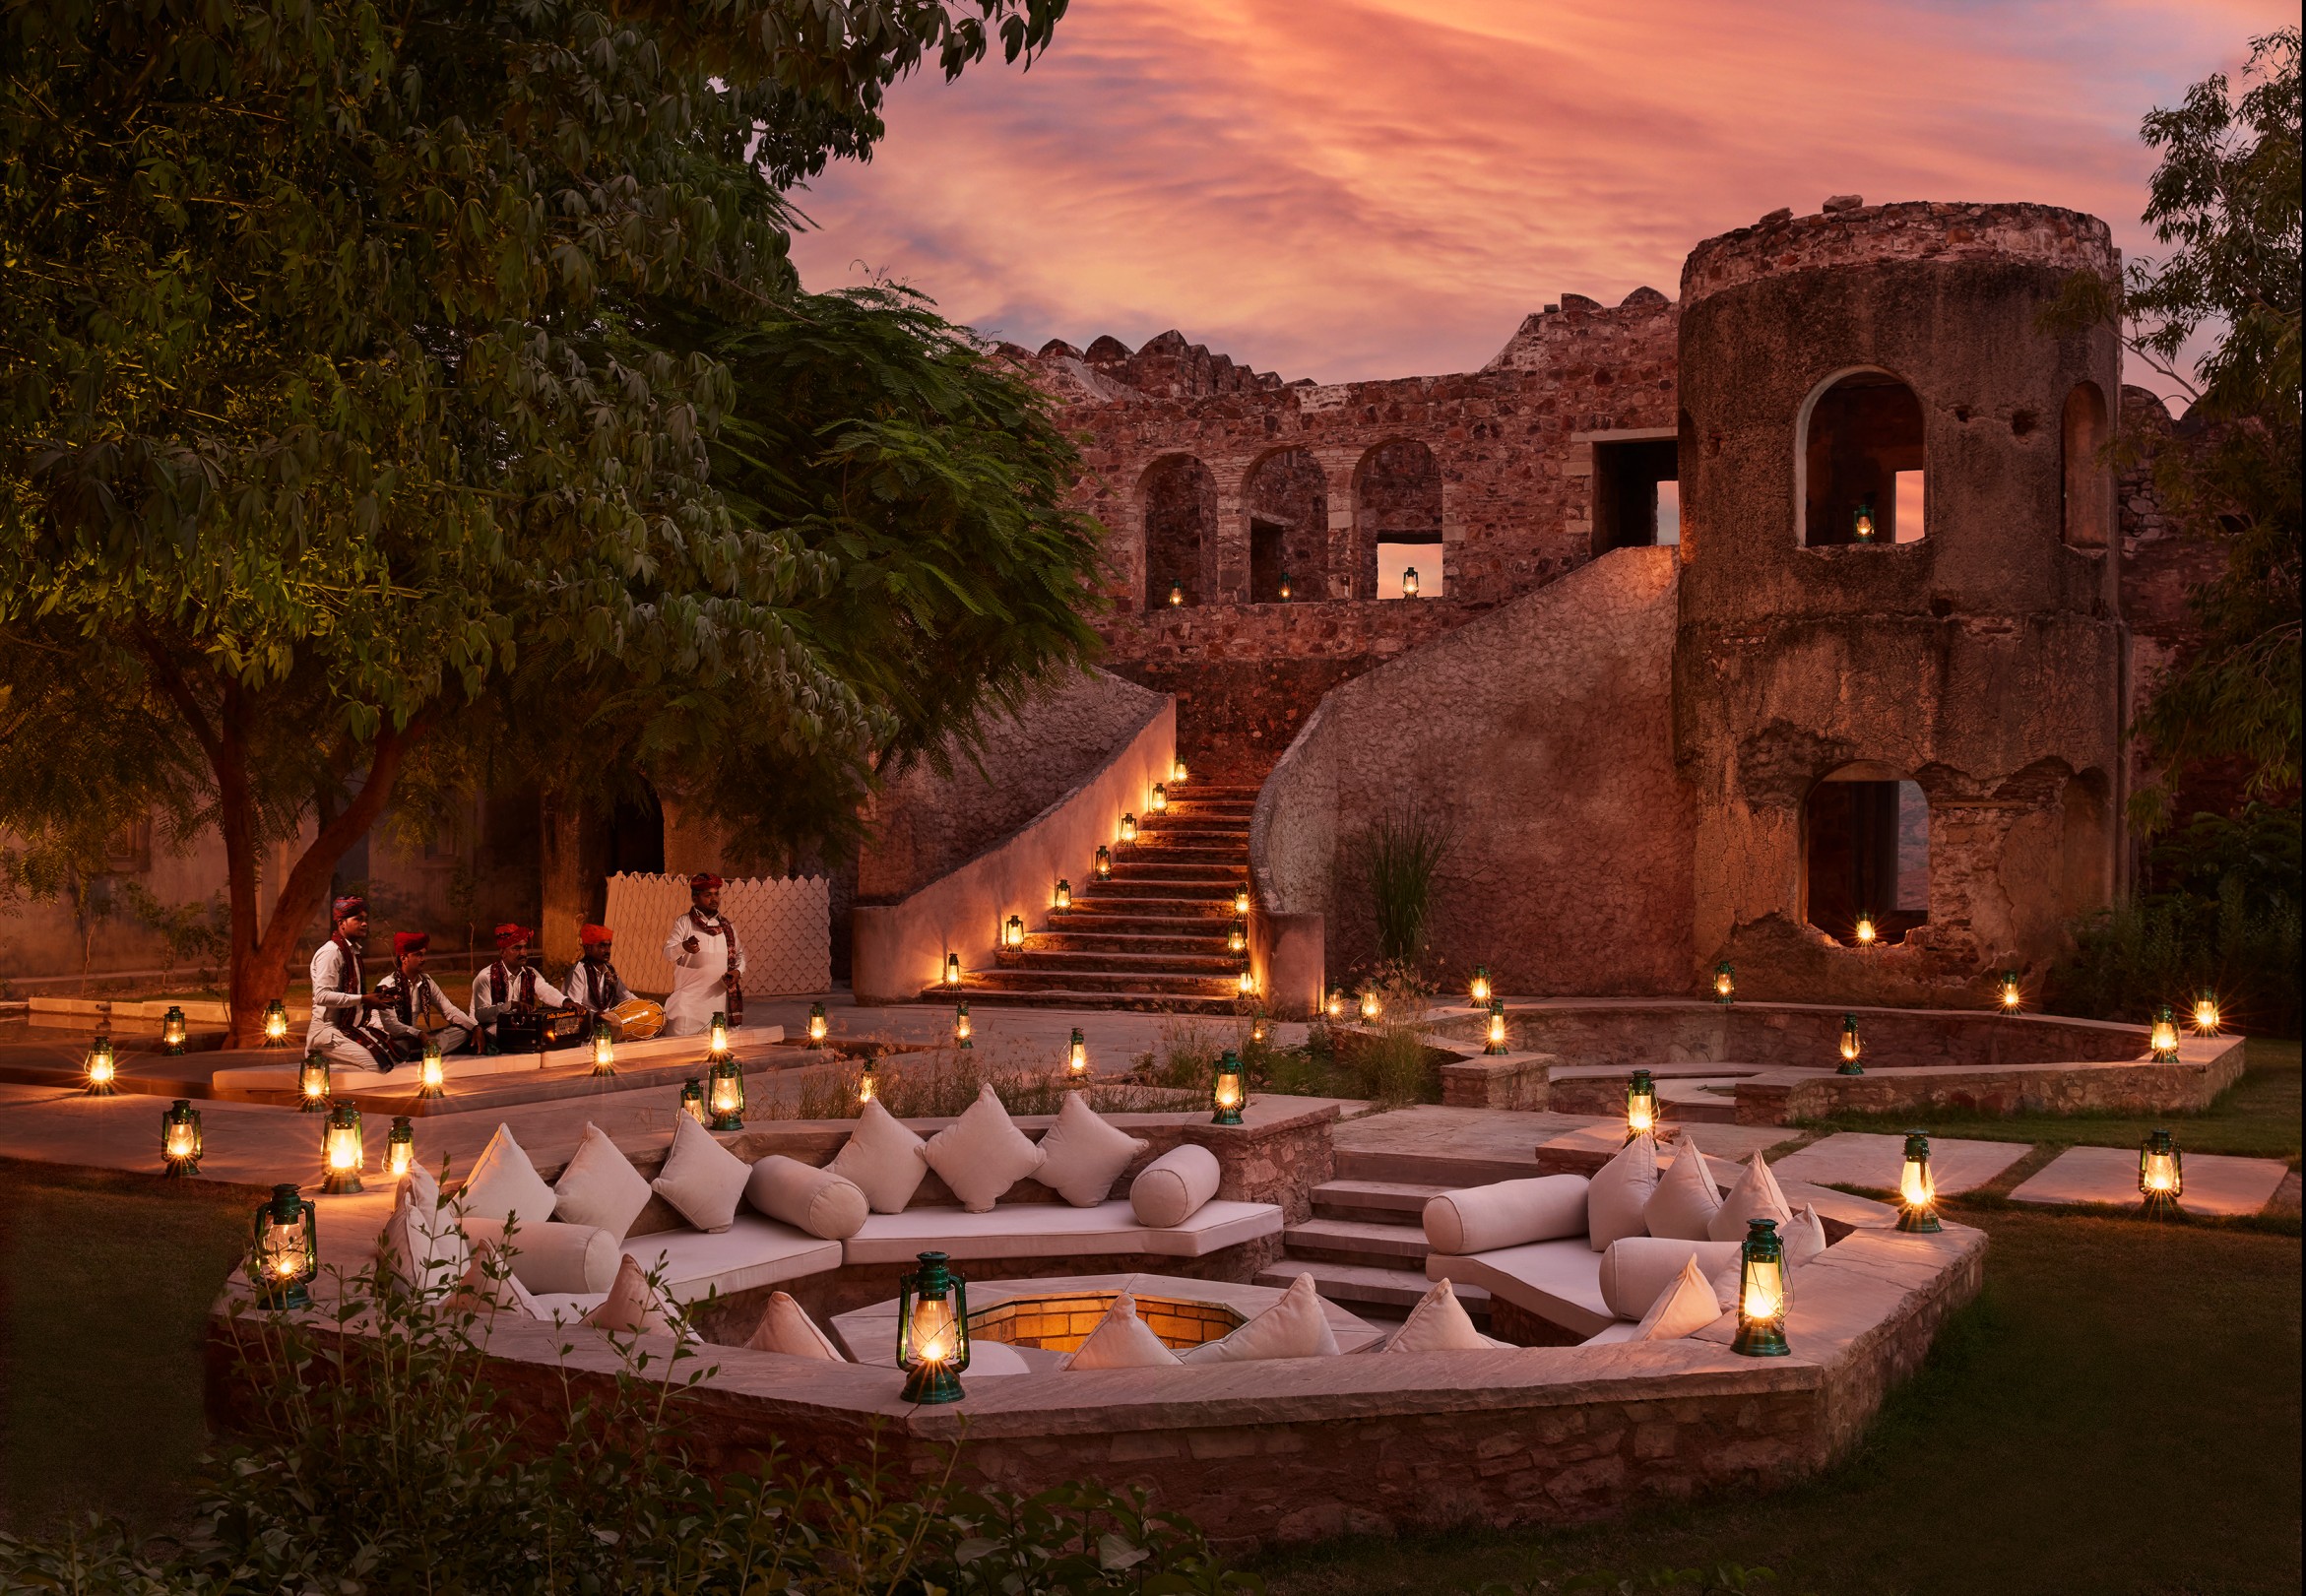 Six Senses Fort Barwara is all set to celebrate its first anniversary this October